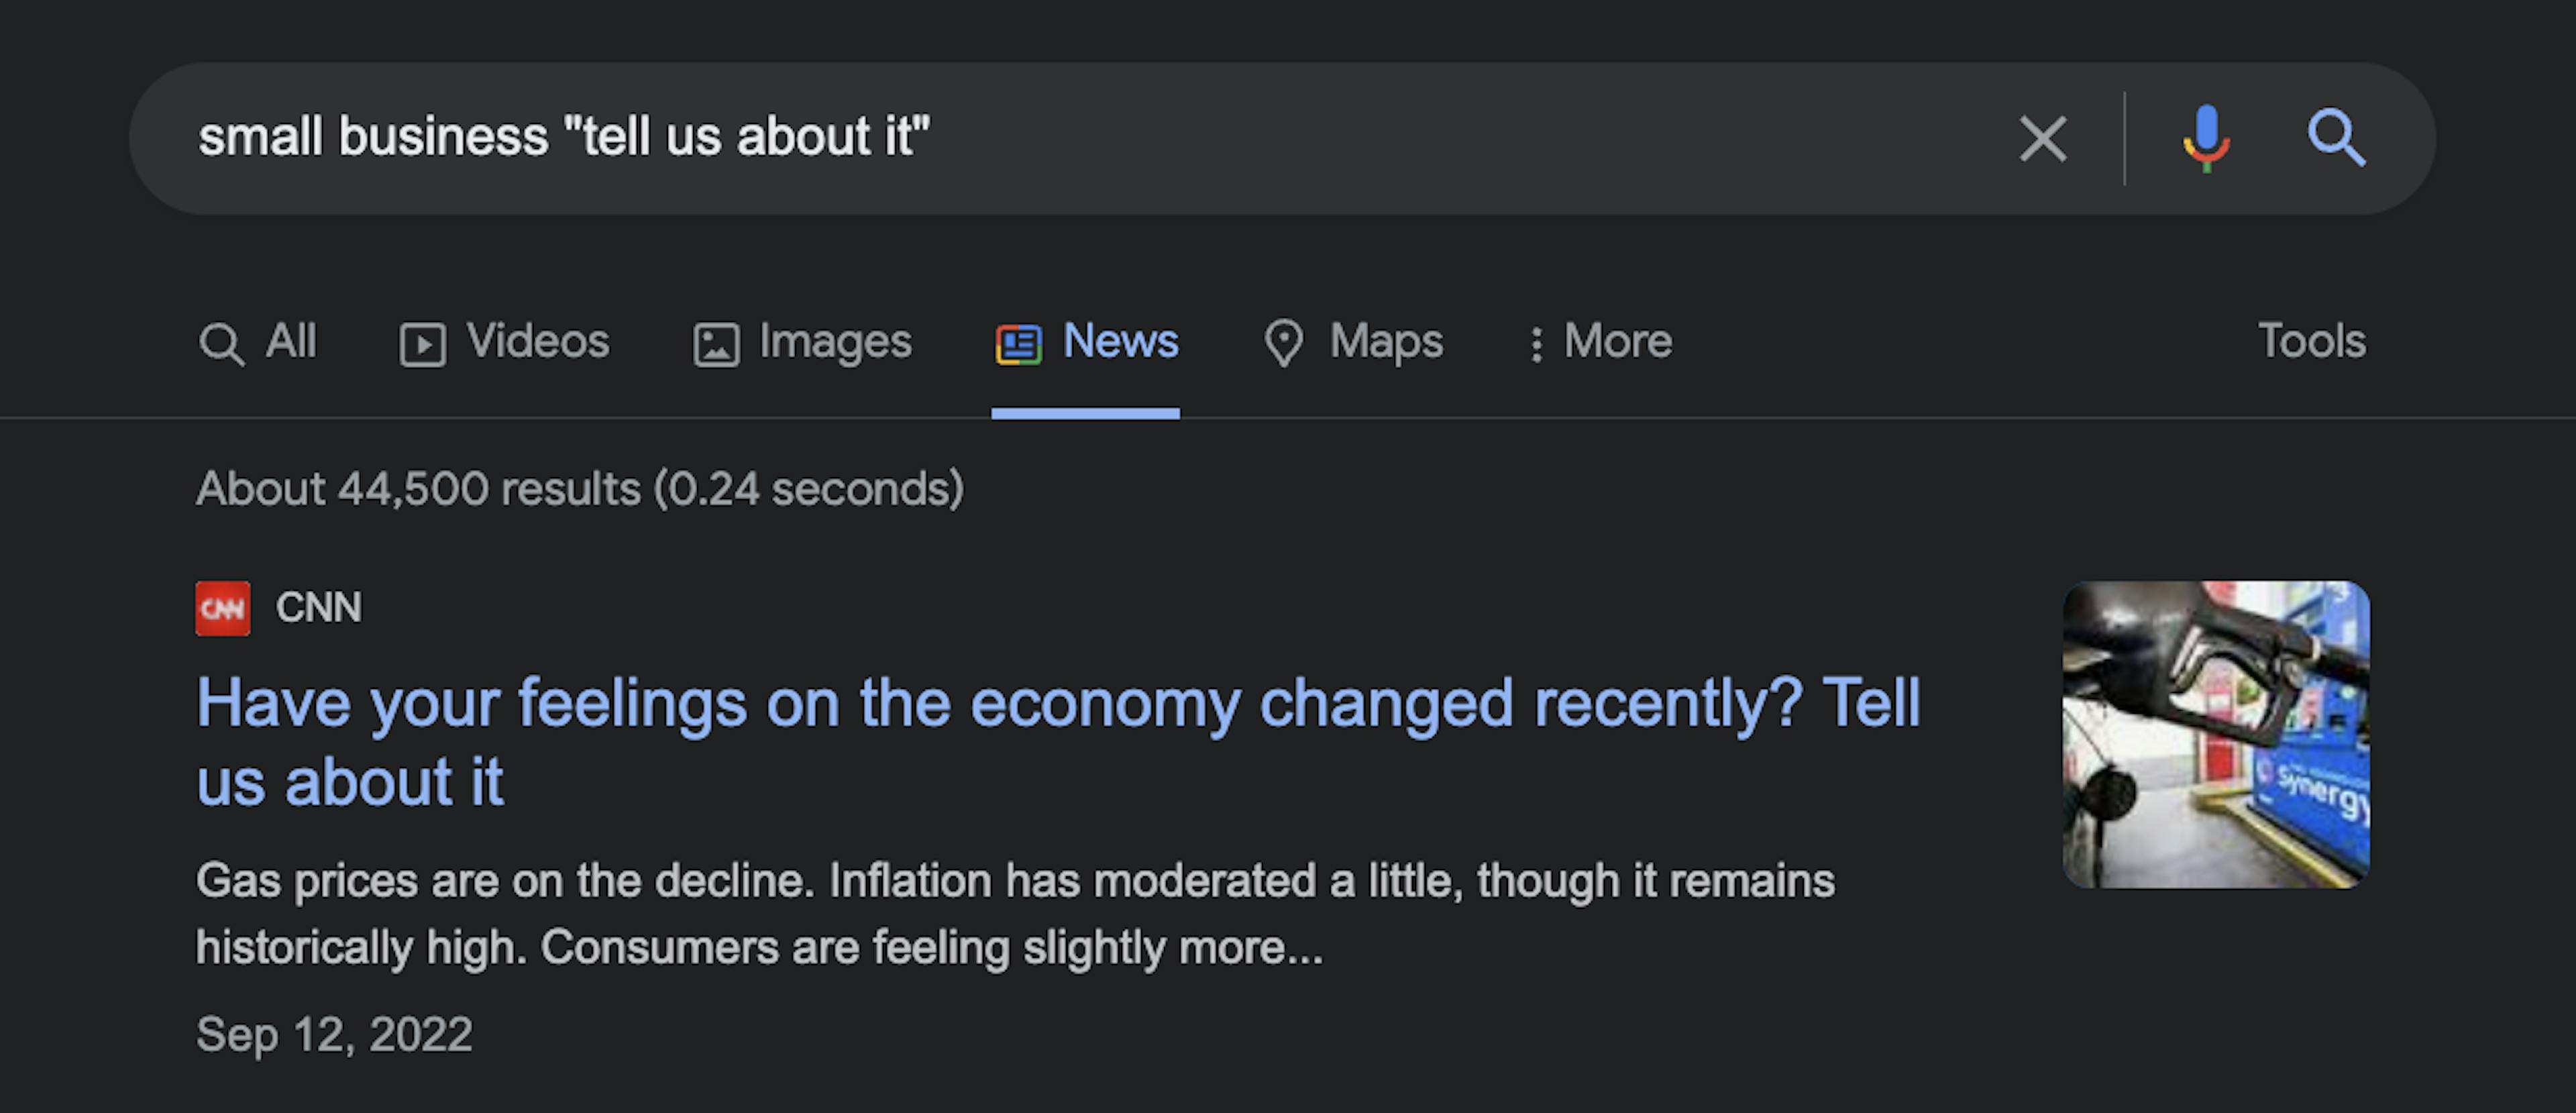 A Google News search example for a small business. Alternatives can be "hear about your experience" "hear from you" etc.